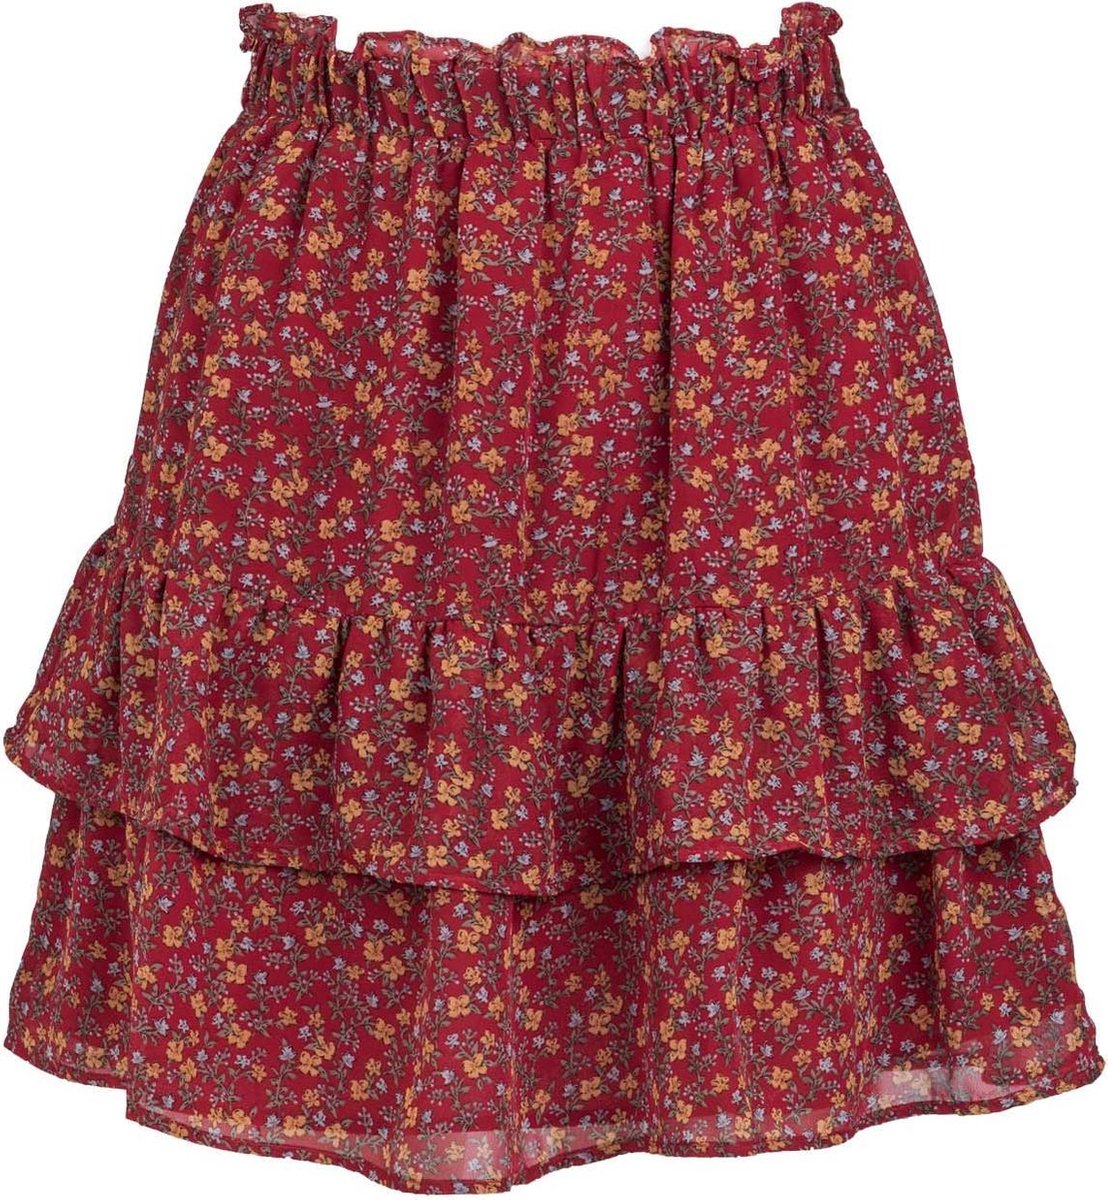 Floral ruffle skirt red